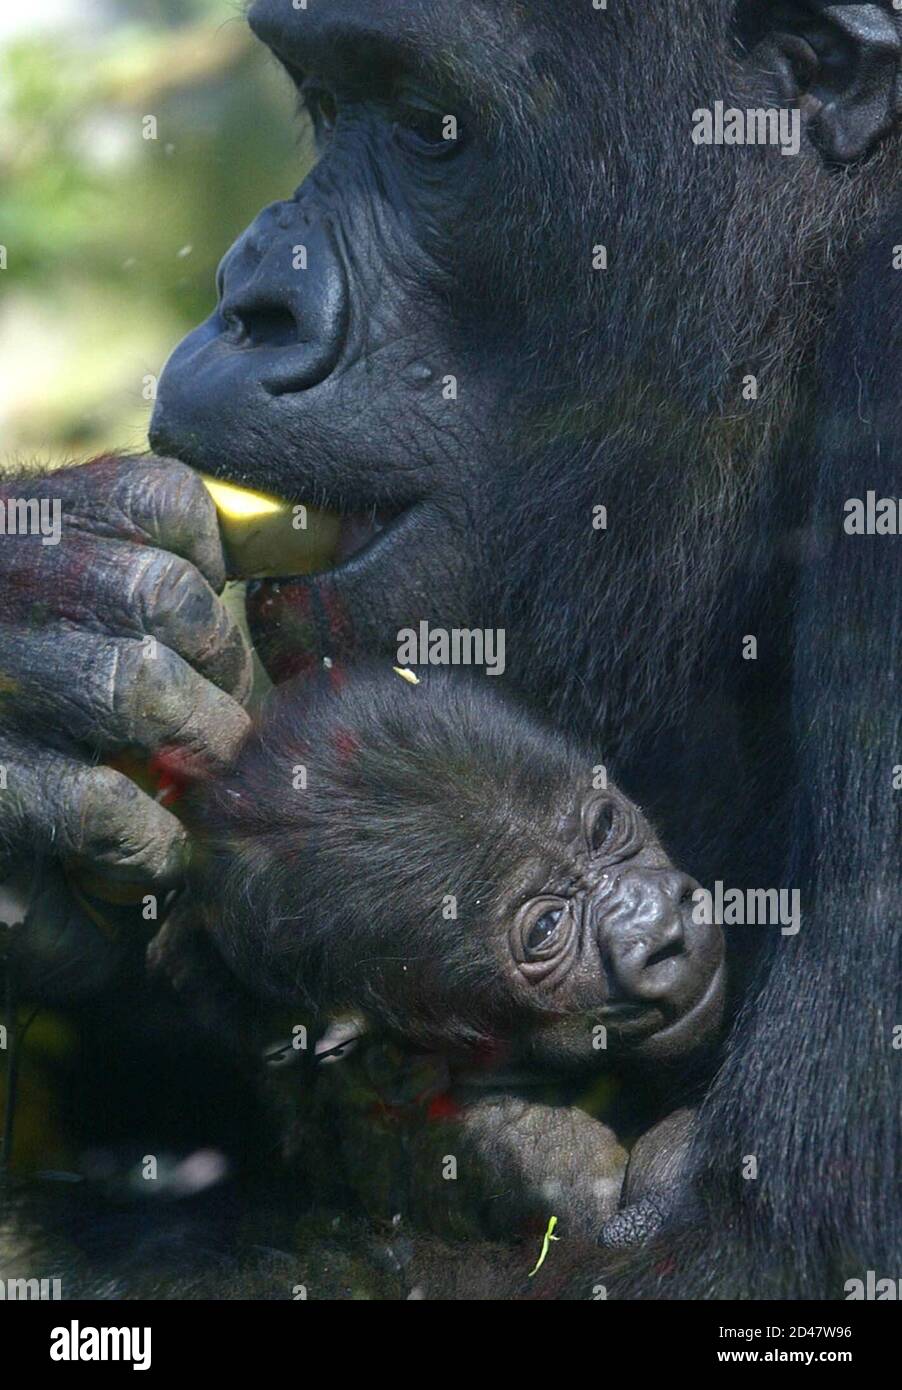 Four week old gorilla baby 'Ituri' rests in the arms of mother Rebecca after the baby left the indoor area of the Frankfurt Zoo for the first time on March 27, 2002. Ituri, whose gender is still unknown, is Rebecca's fifth baby in the last ten years, a world record for gorilla births in captivity. Stock Photo